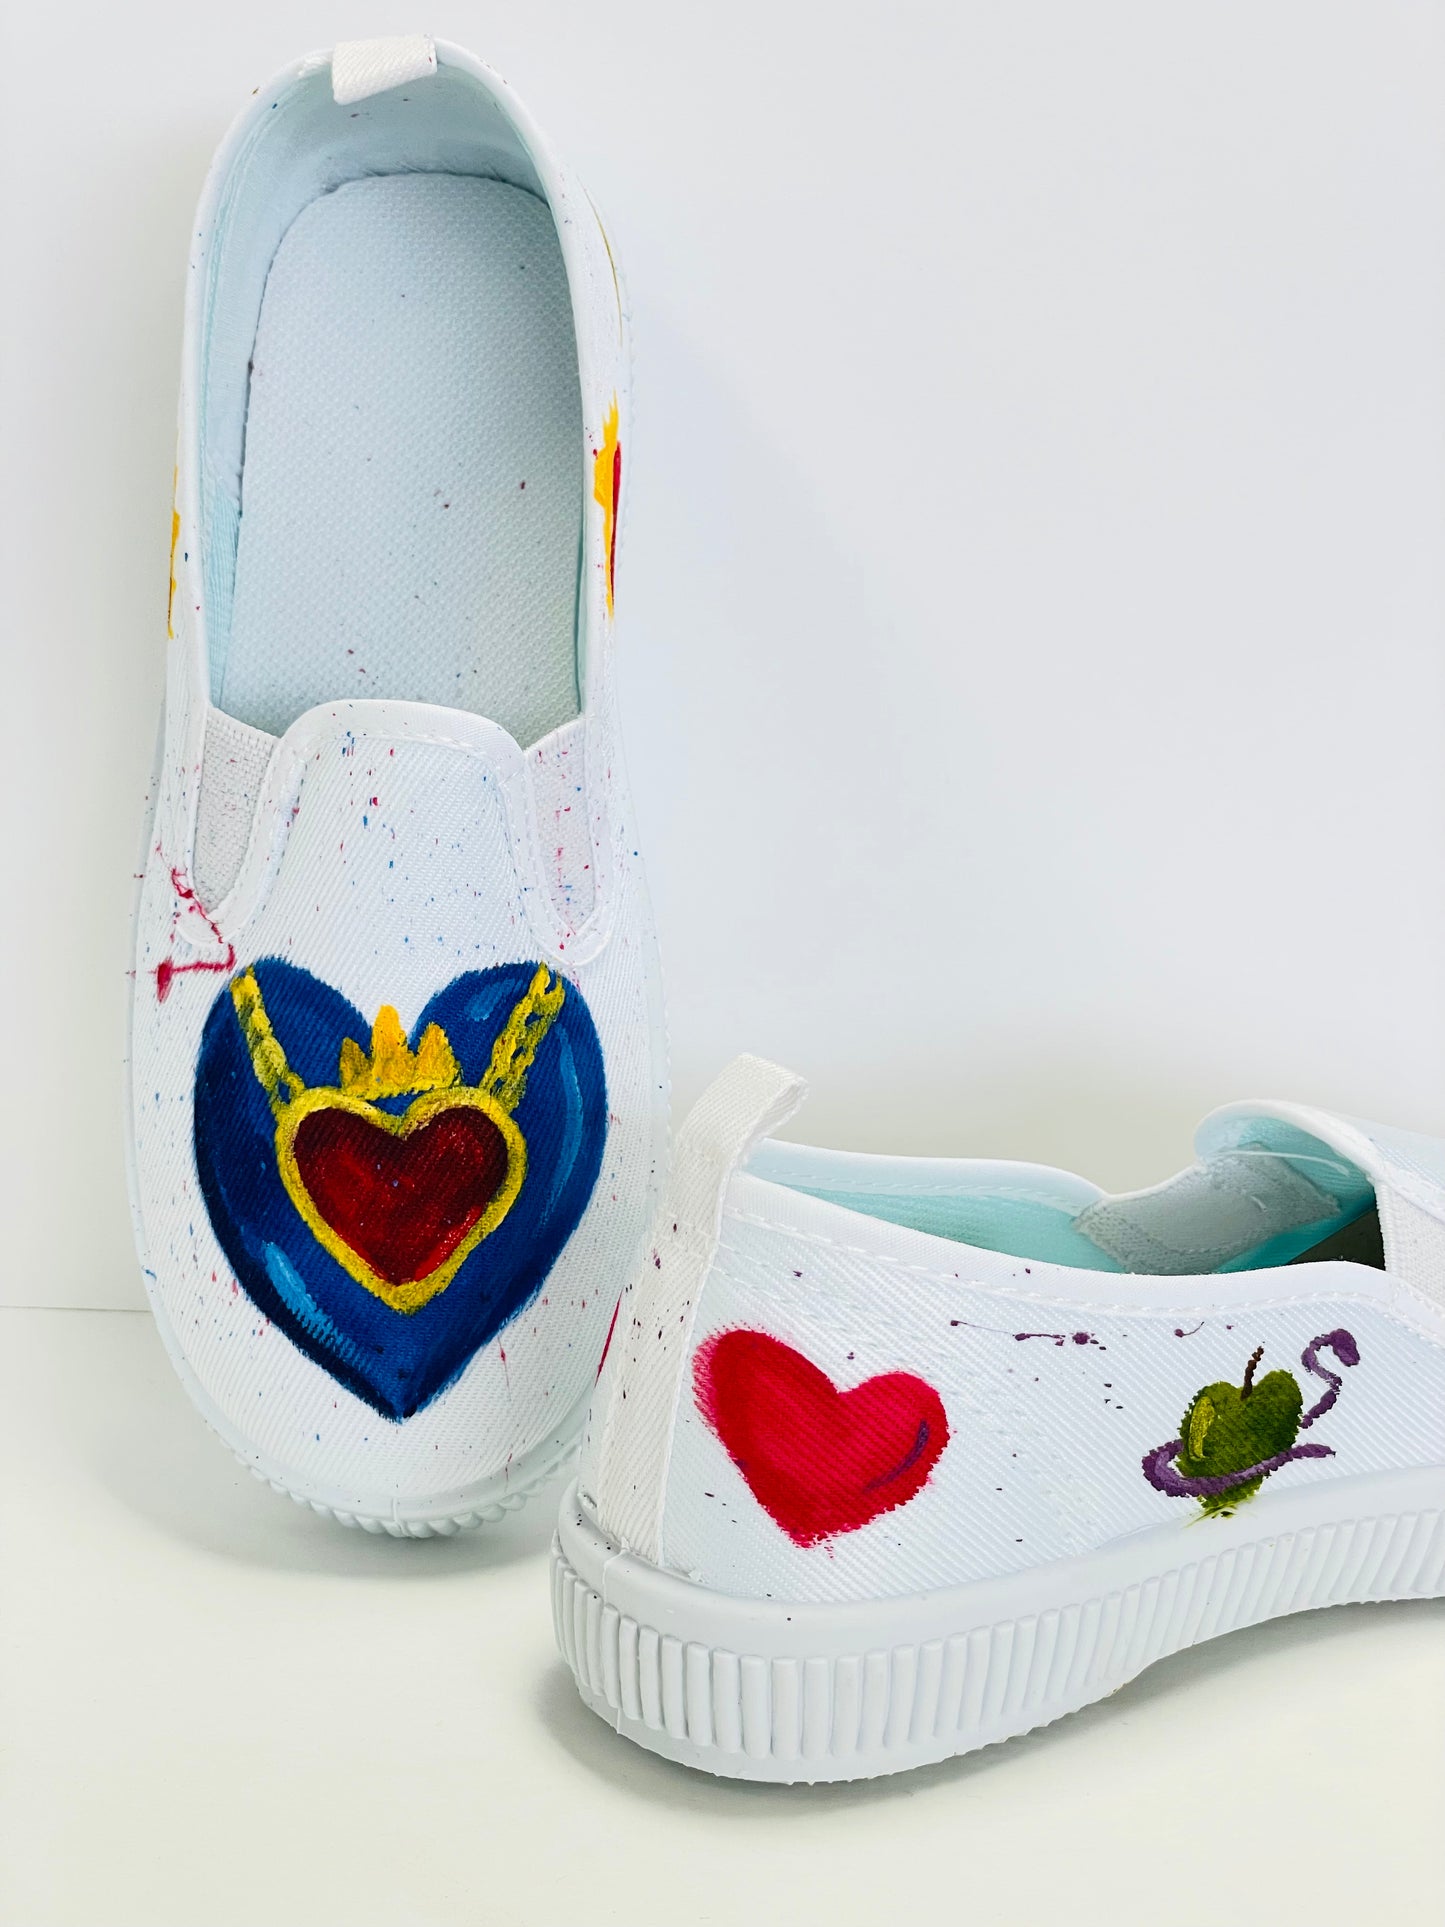 Mon, Oct 9th, 11a-1p "Paint on Canvas Shoes" Private Houston Kids Painting Party